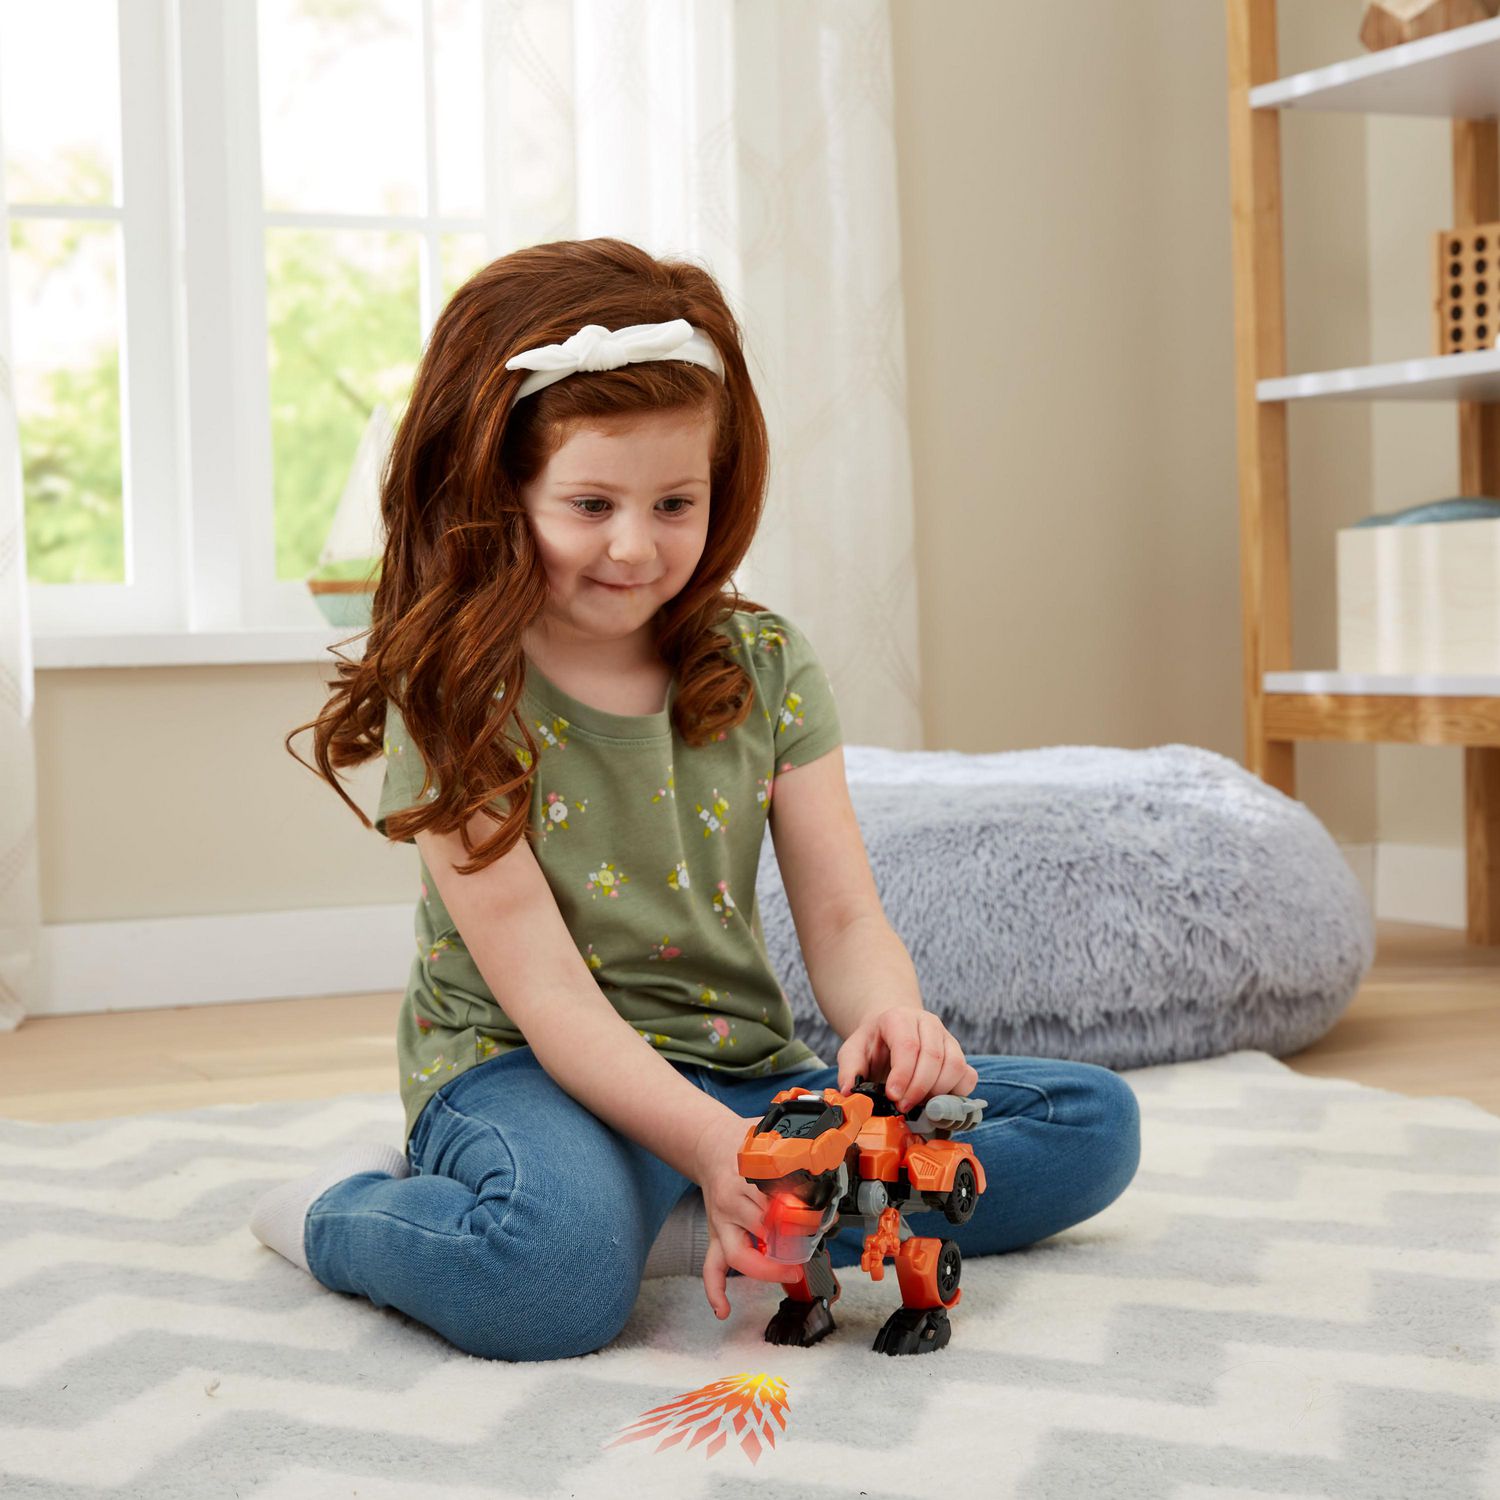 VTech Switch & Go T-Rex Race Car Transforming Dinosaur to Vehicle Toy -  English Version, 4+ Years